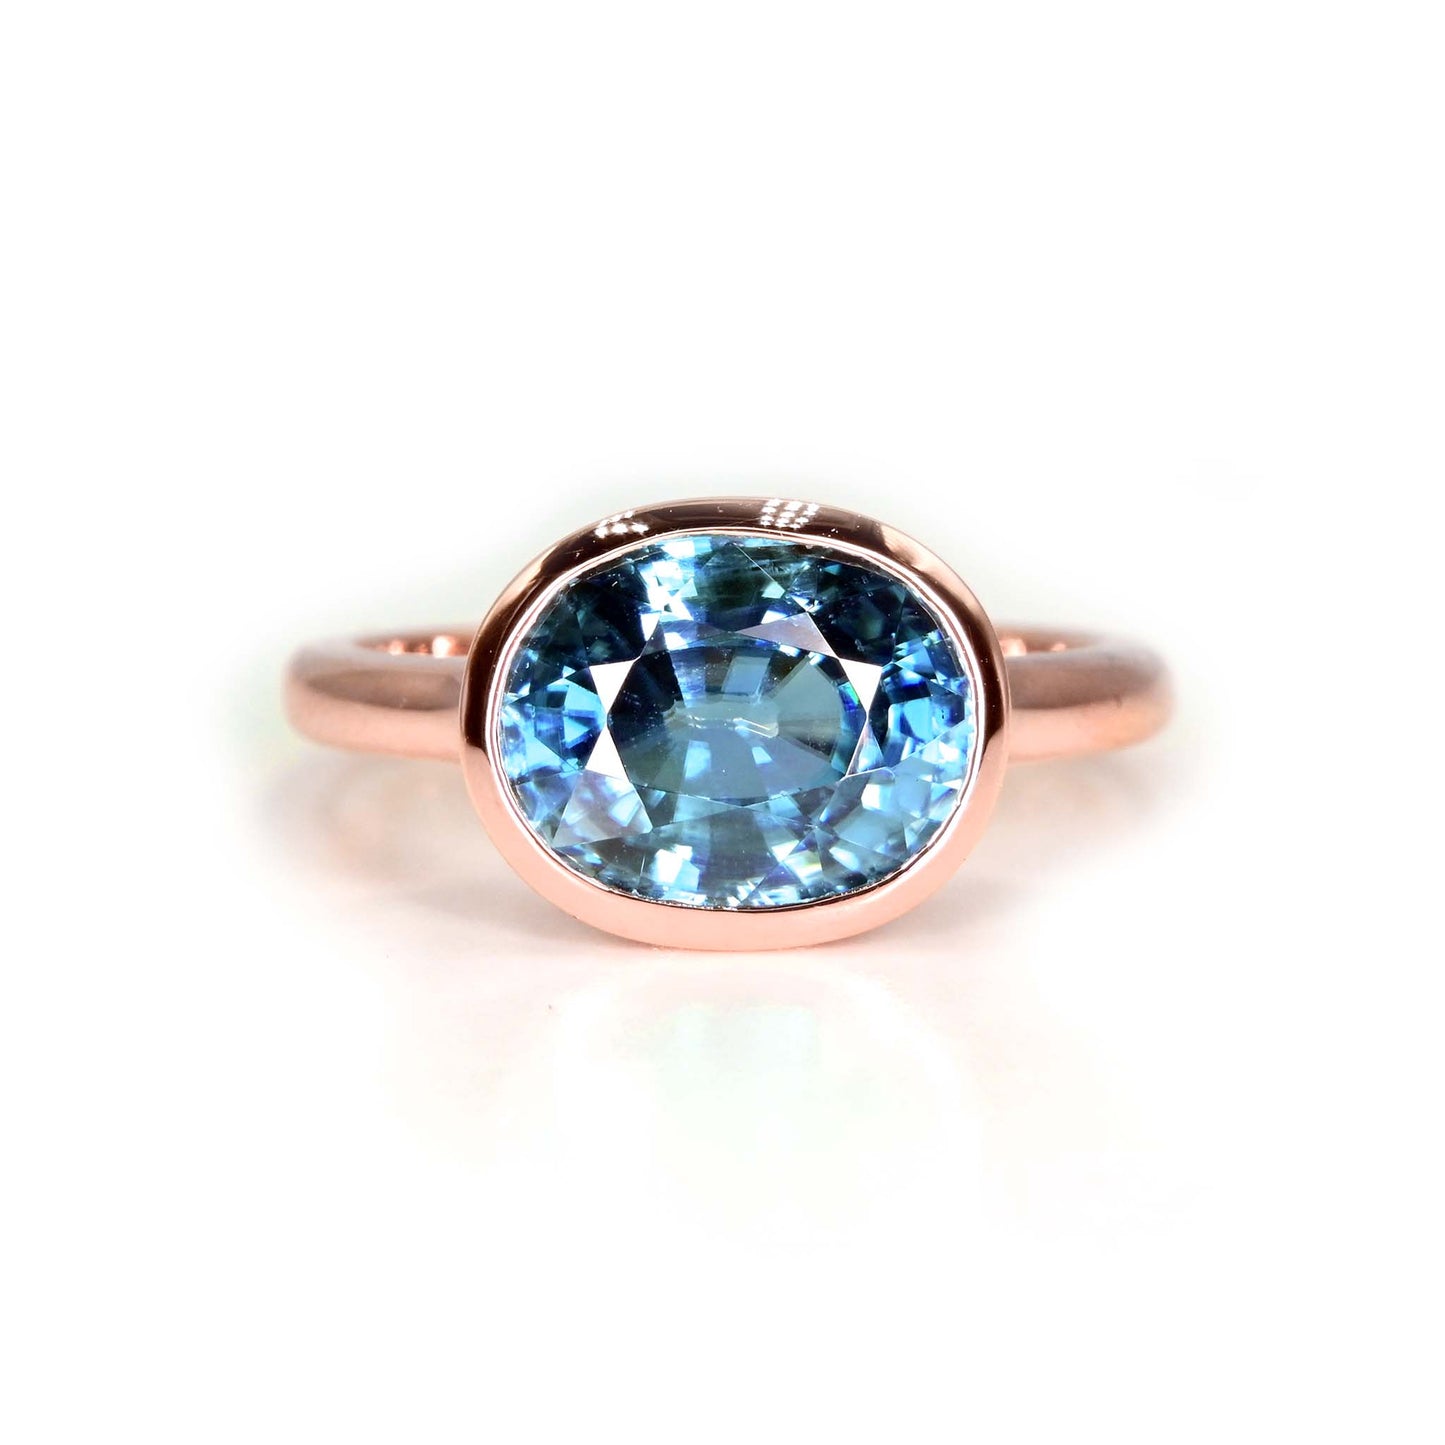 Good quality Thai Blue Zircon handmade ring available in Chiang Mai, Thailand